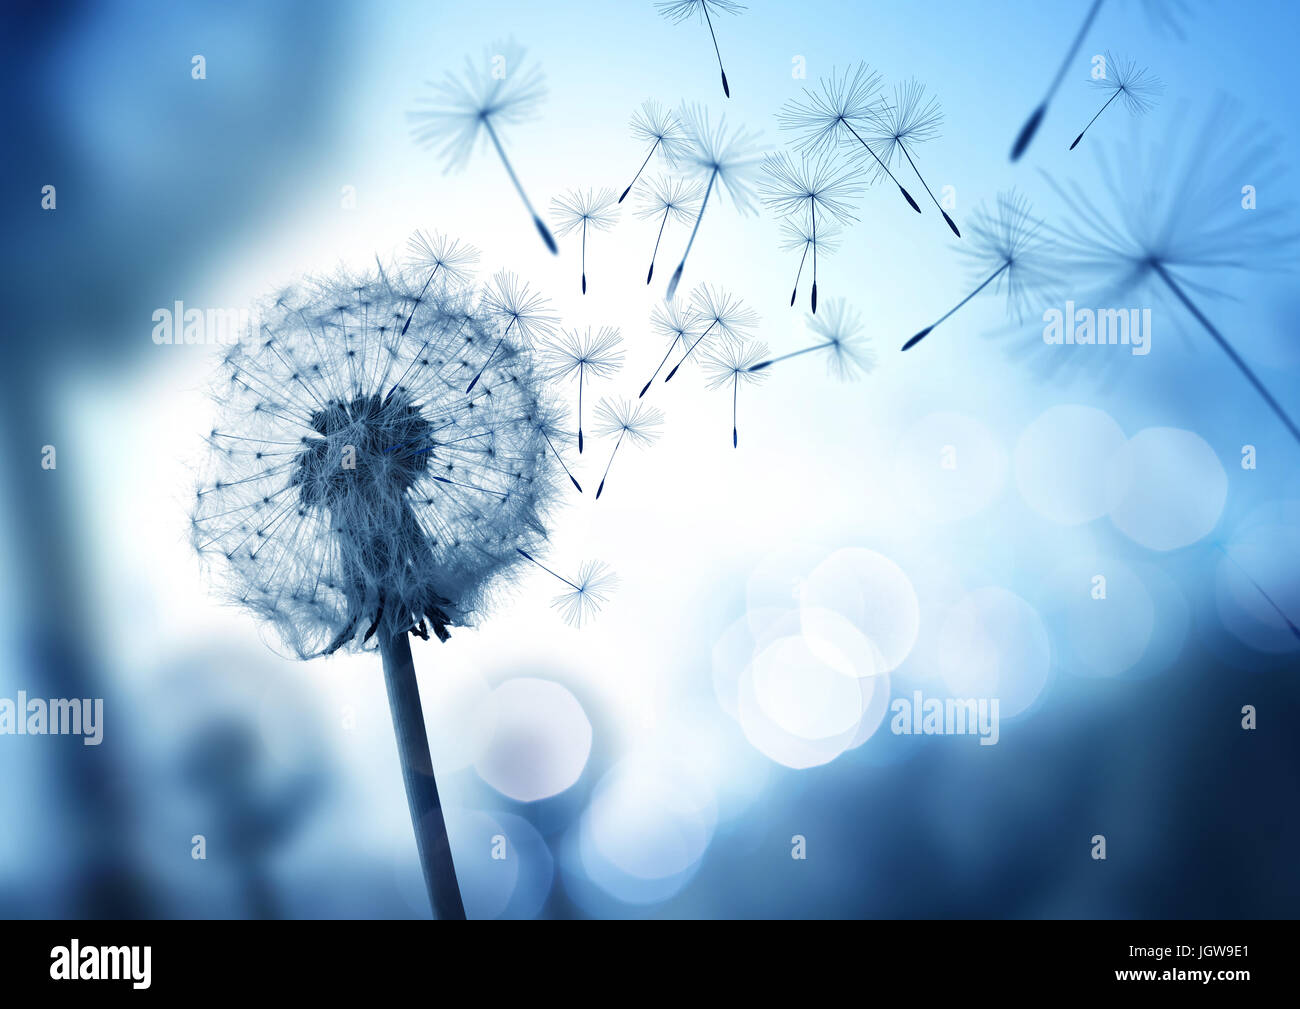 Dandelion seeds blowing in the wind across a cool field background, conceptual image meaning change, growth, movement and direction. Stock Photo